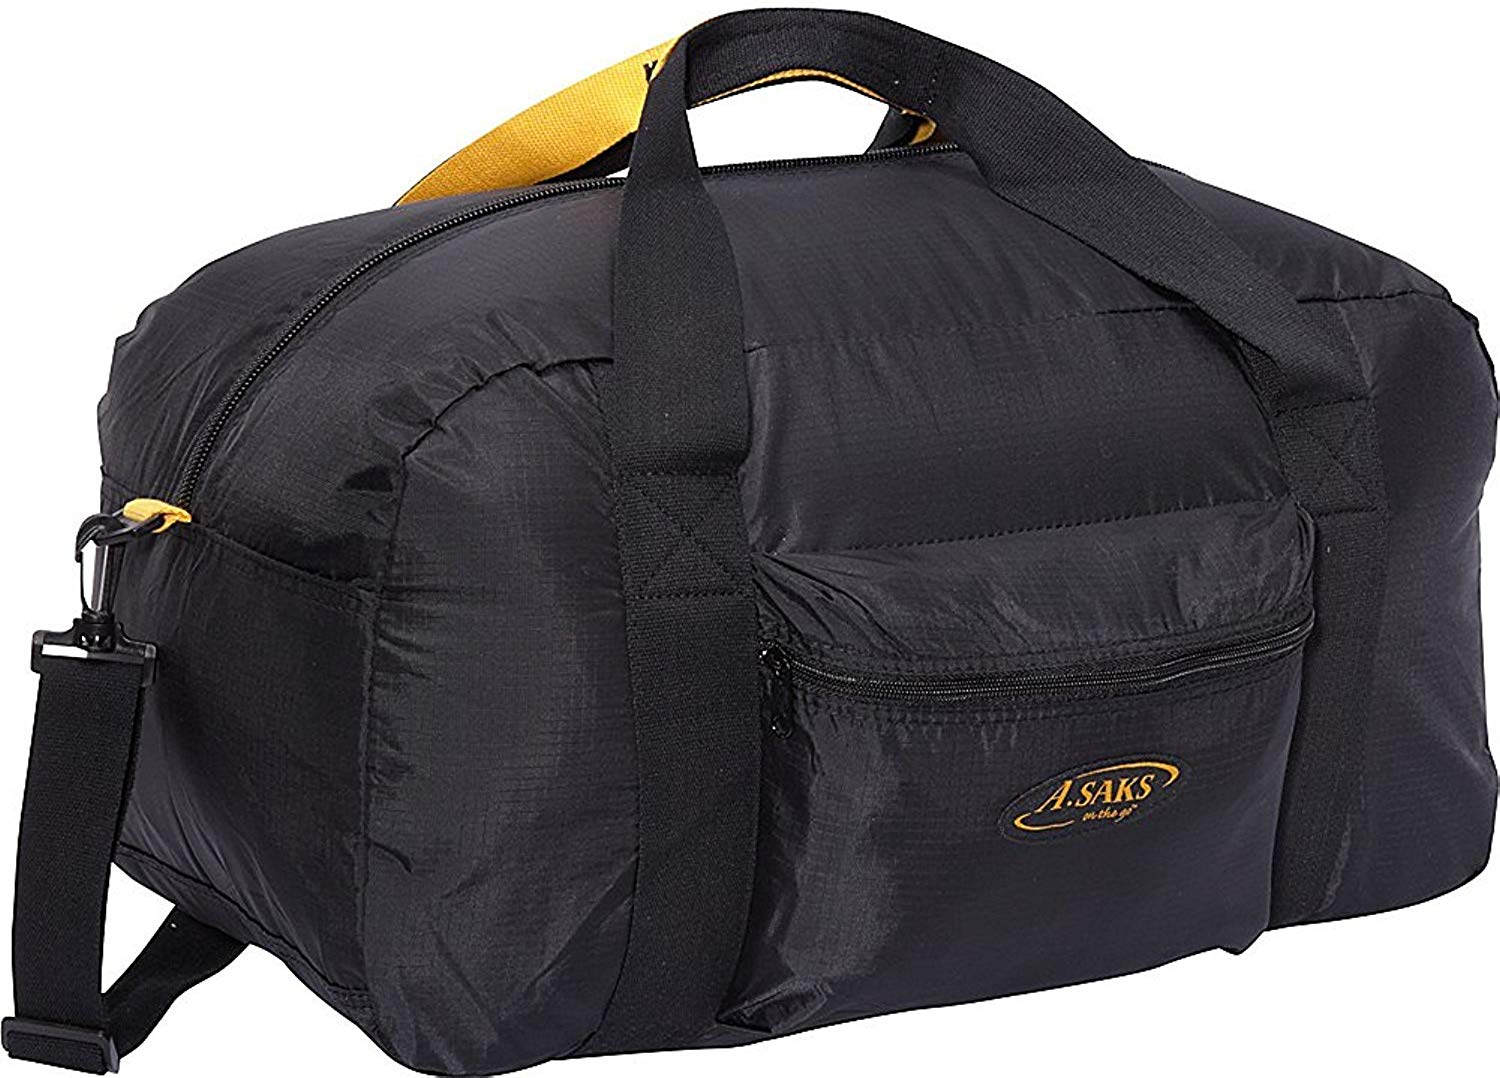 A. Saks 22"Carry-On Nylon Duffel Bag With Pouch